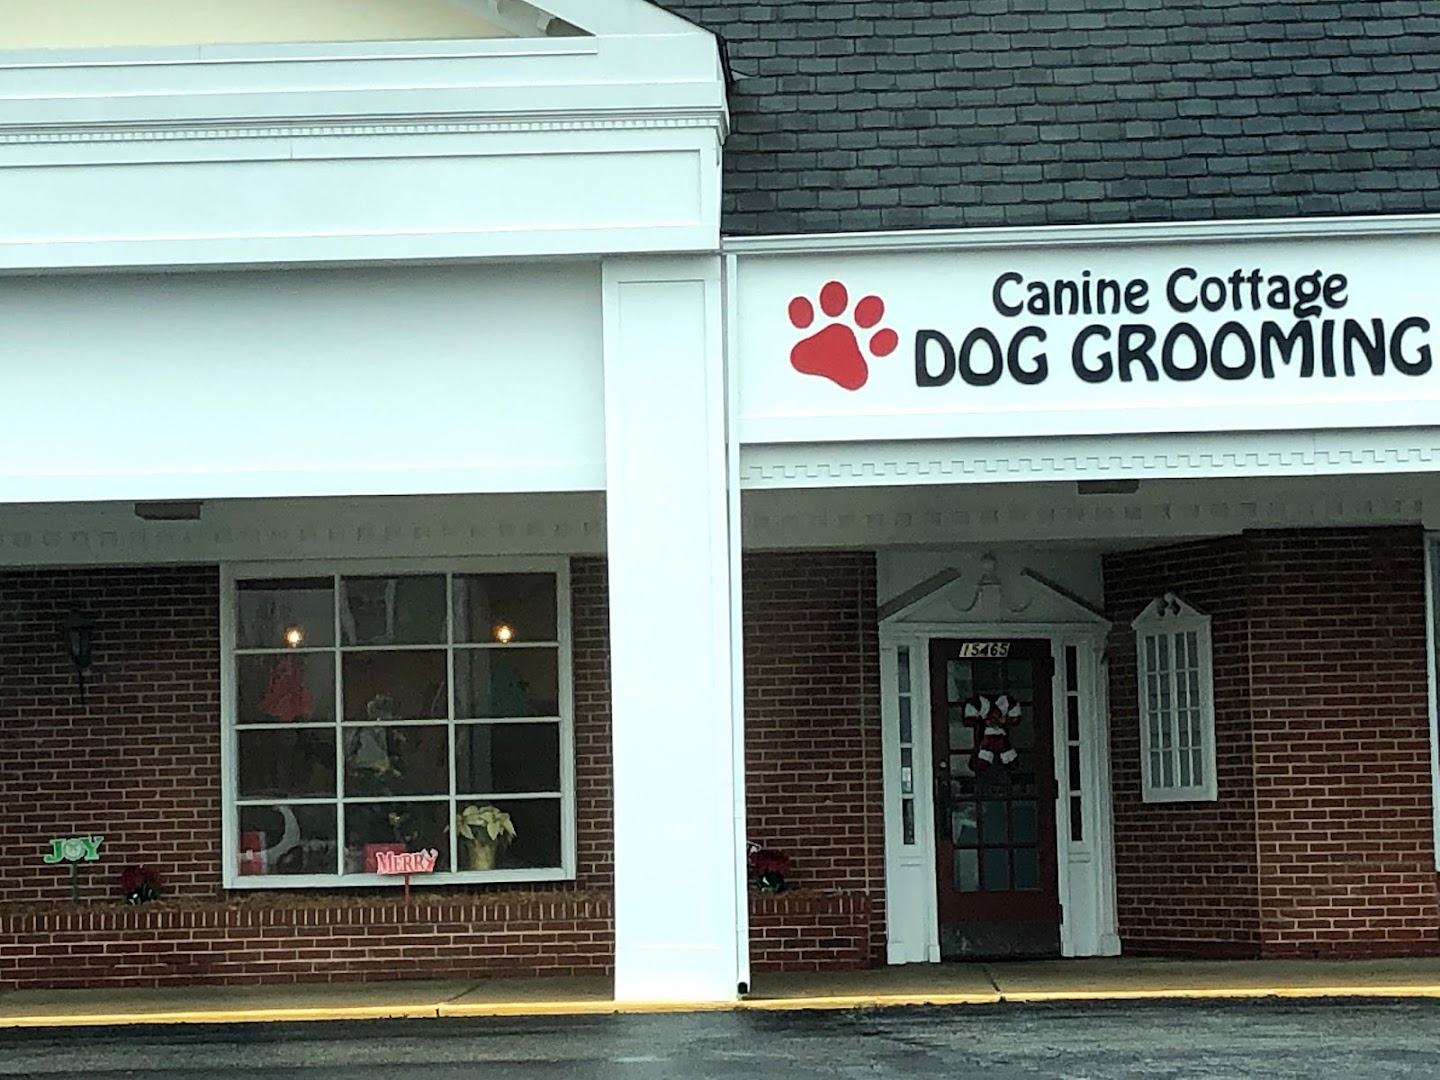 Canine Cottage Dog Grooming